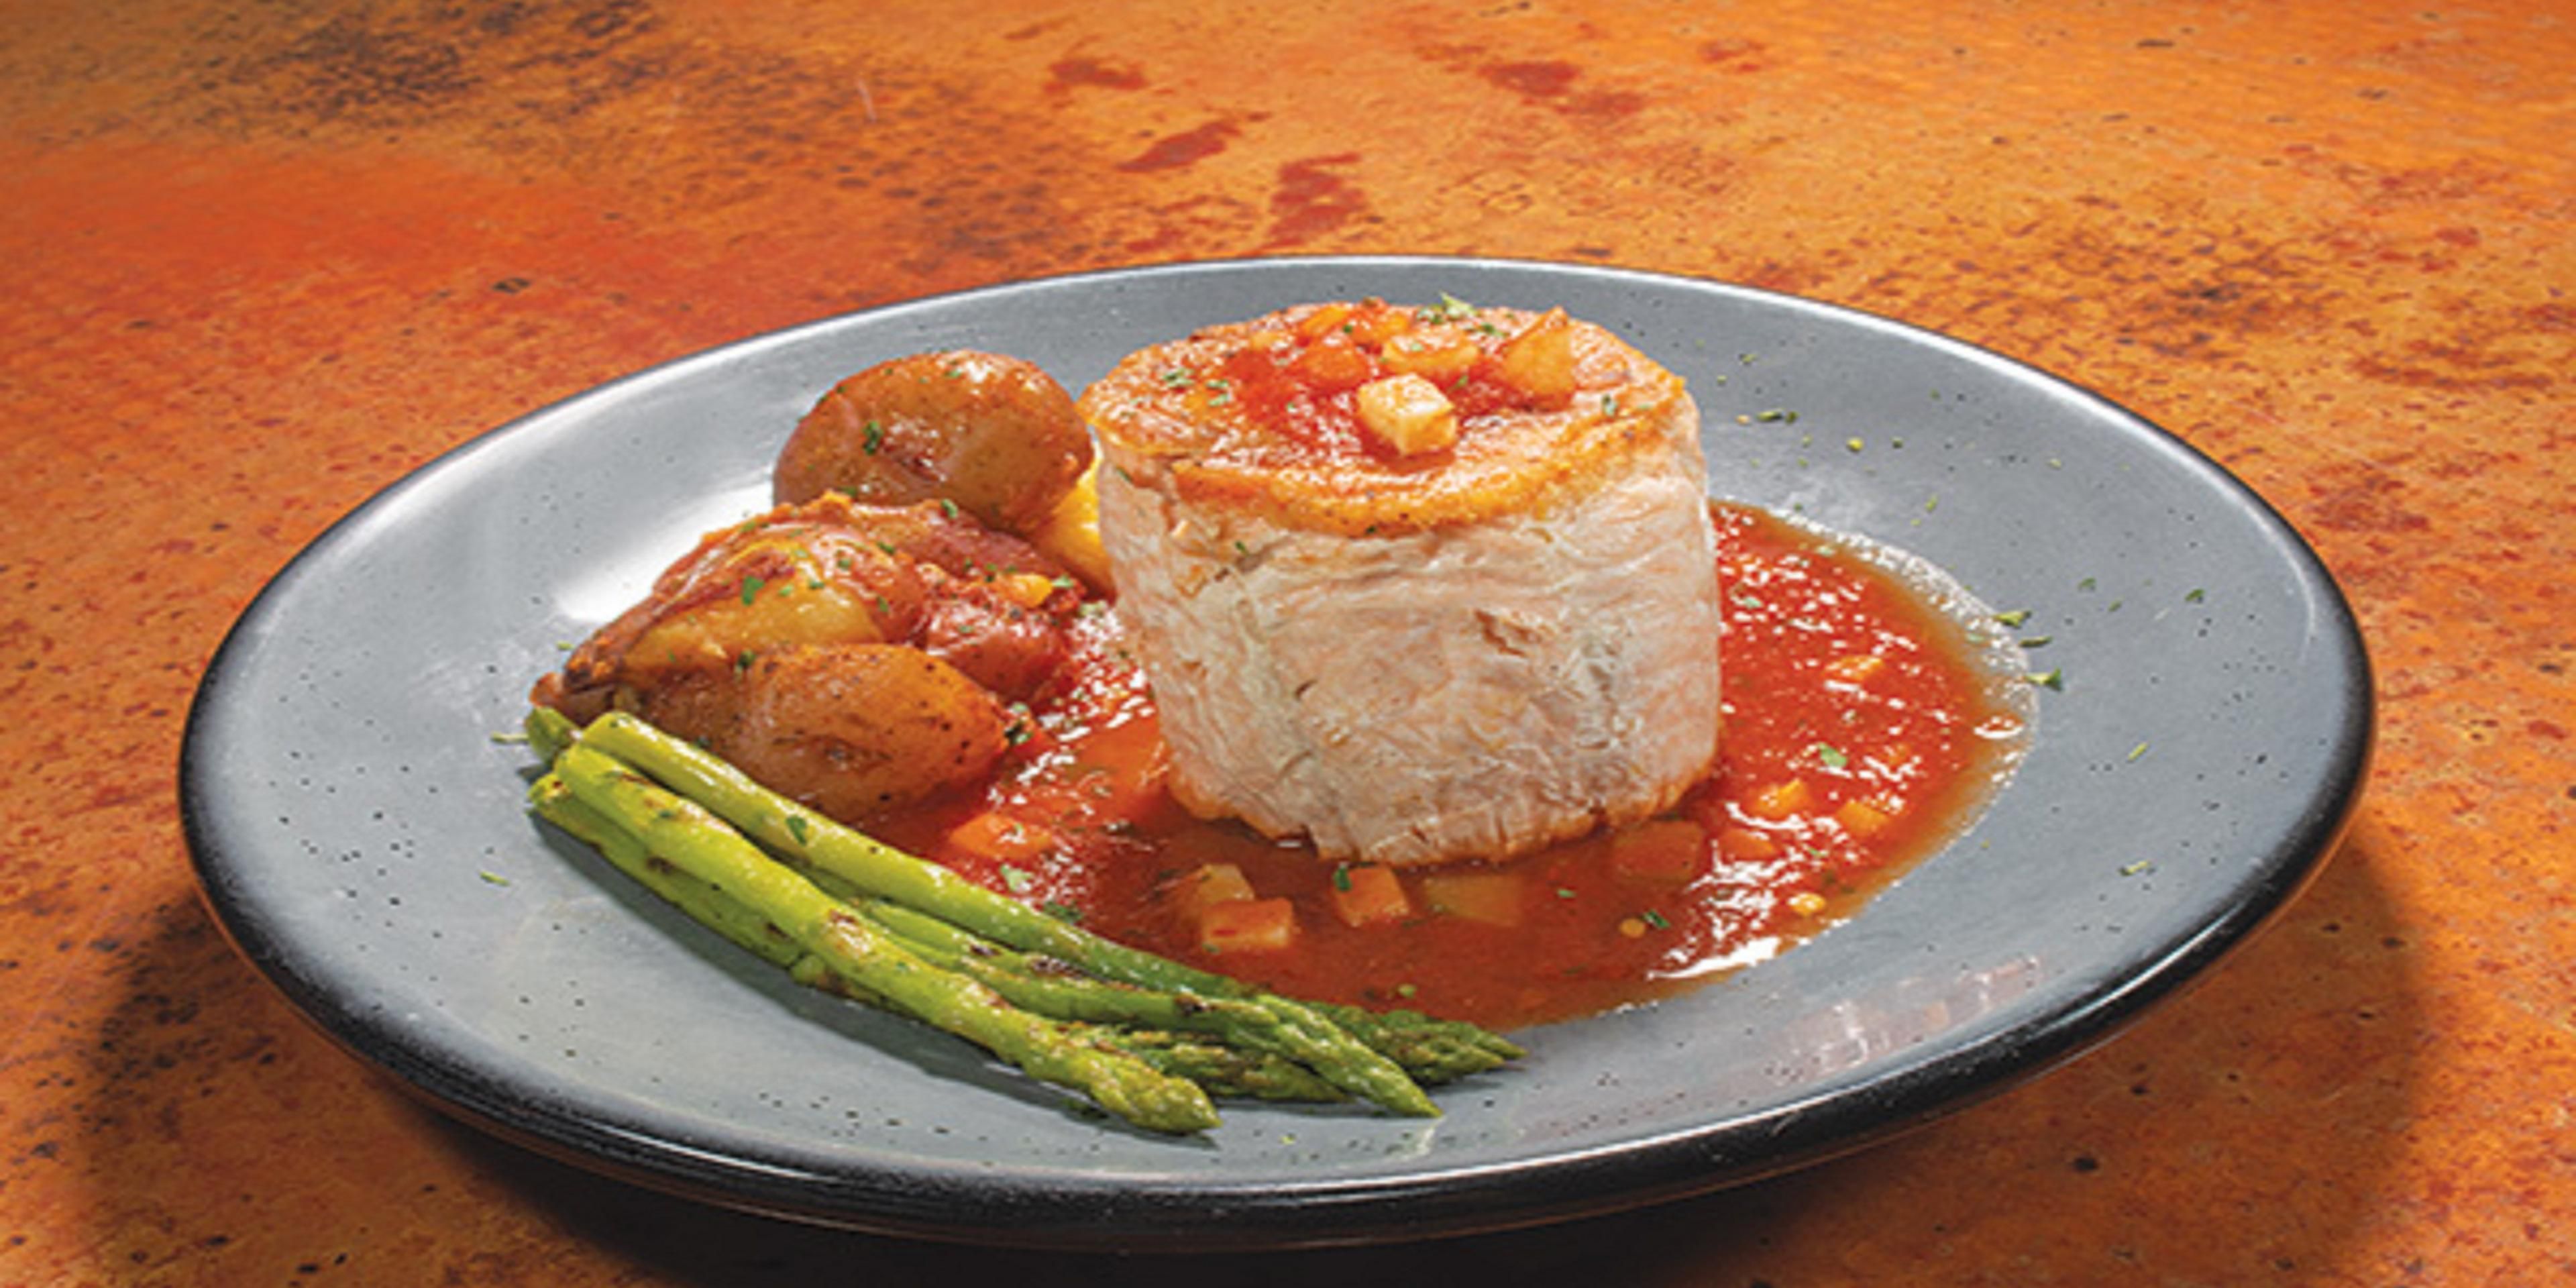 Enjoy one of our best selling dishes.